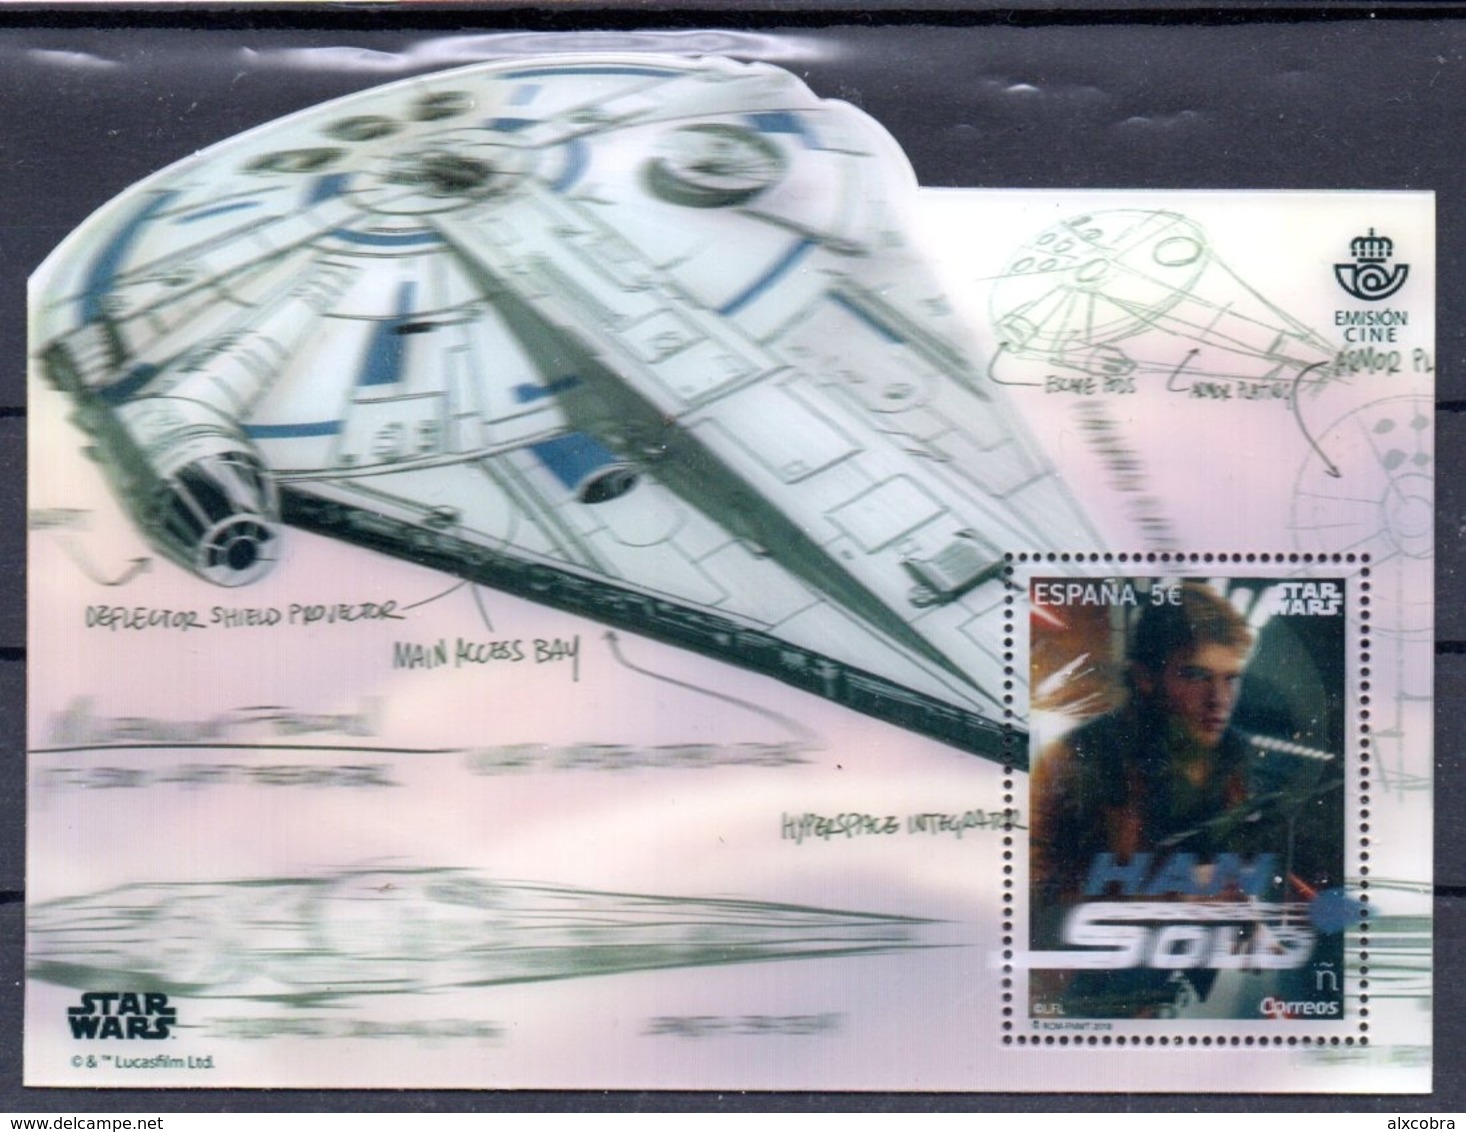 Spain Han Solo Star Wars 2018 M/S Holographic MNH - Hologrammes